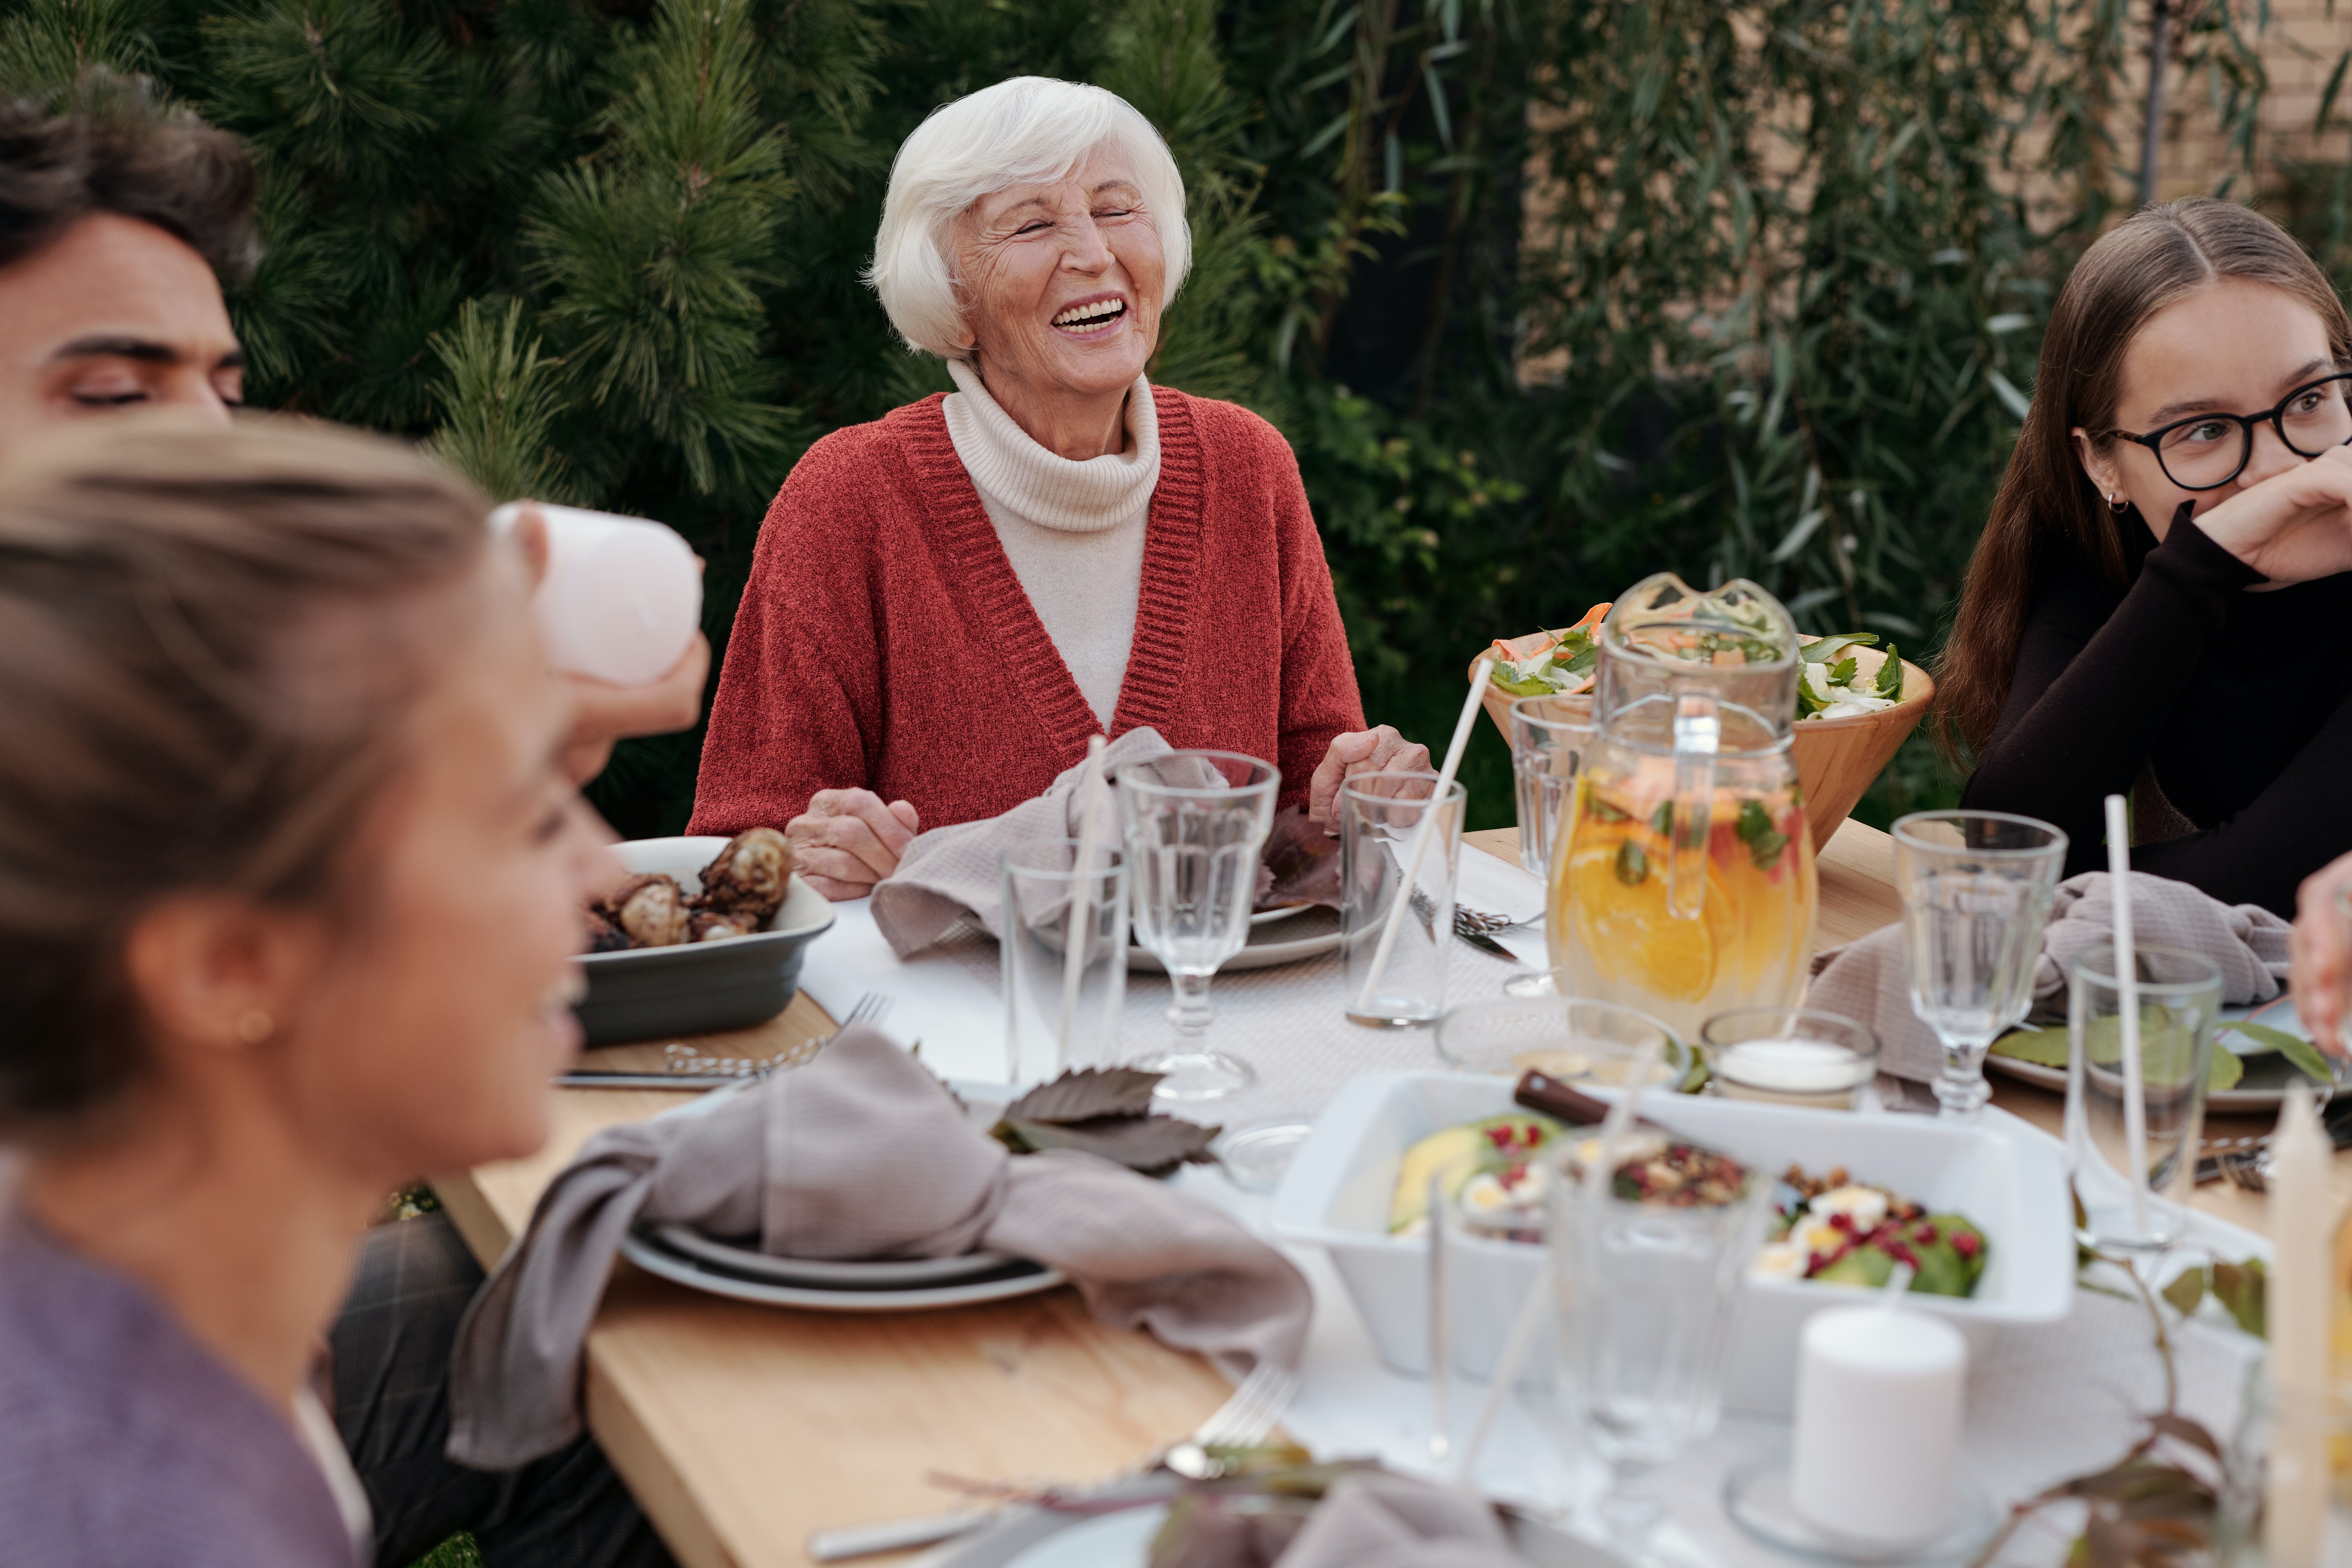 Older woman shown having a meal with her family